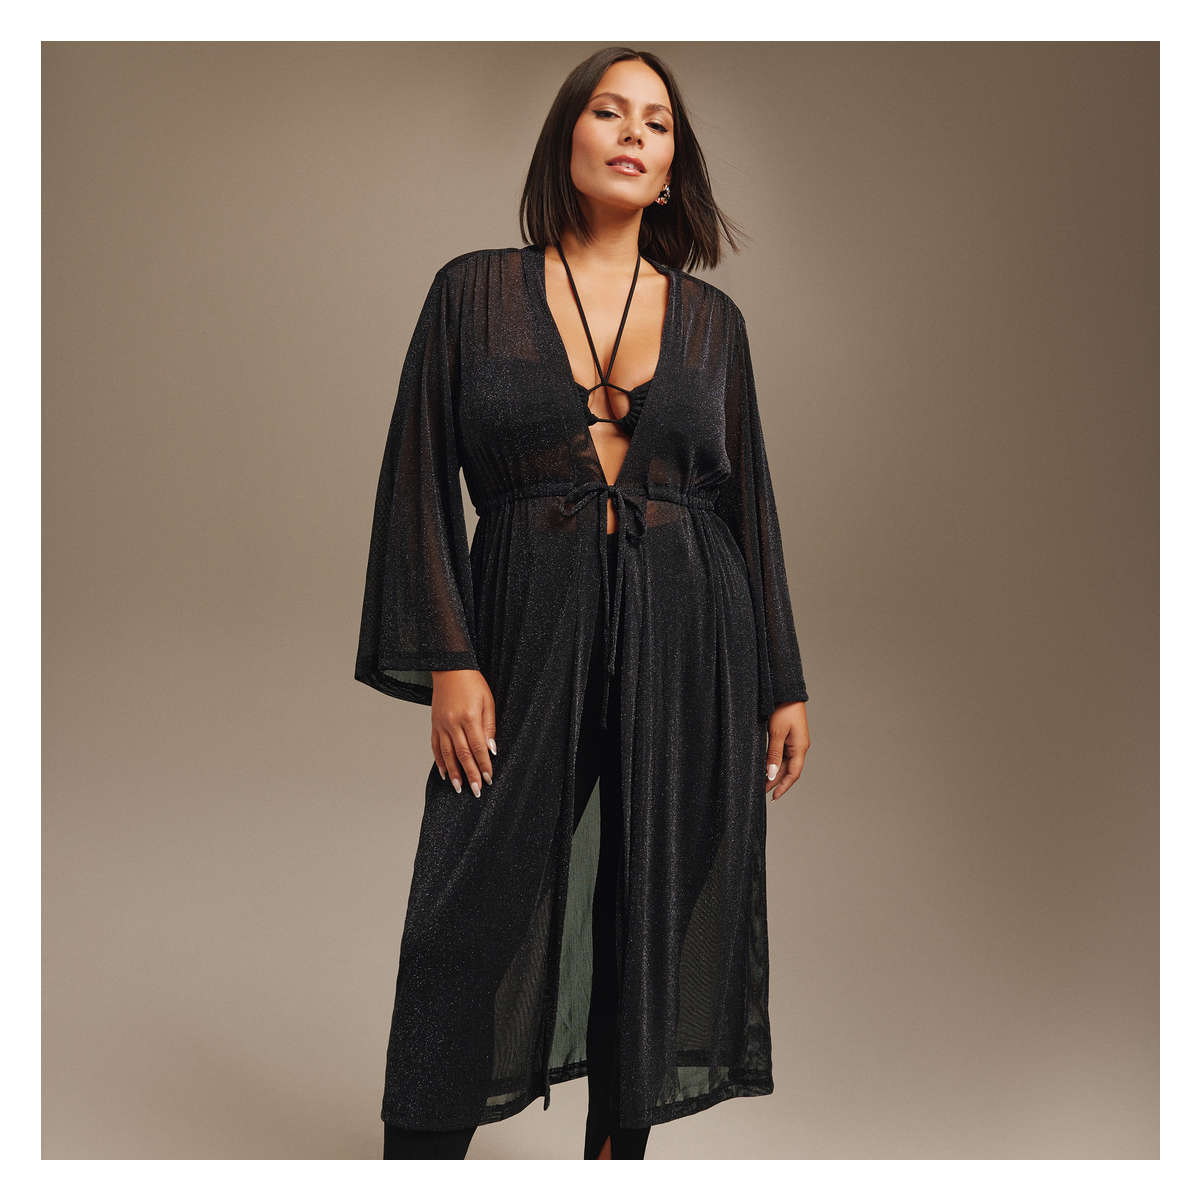 Metallic Knit Cover-Up in Black from Joe Fresh